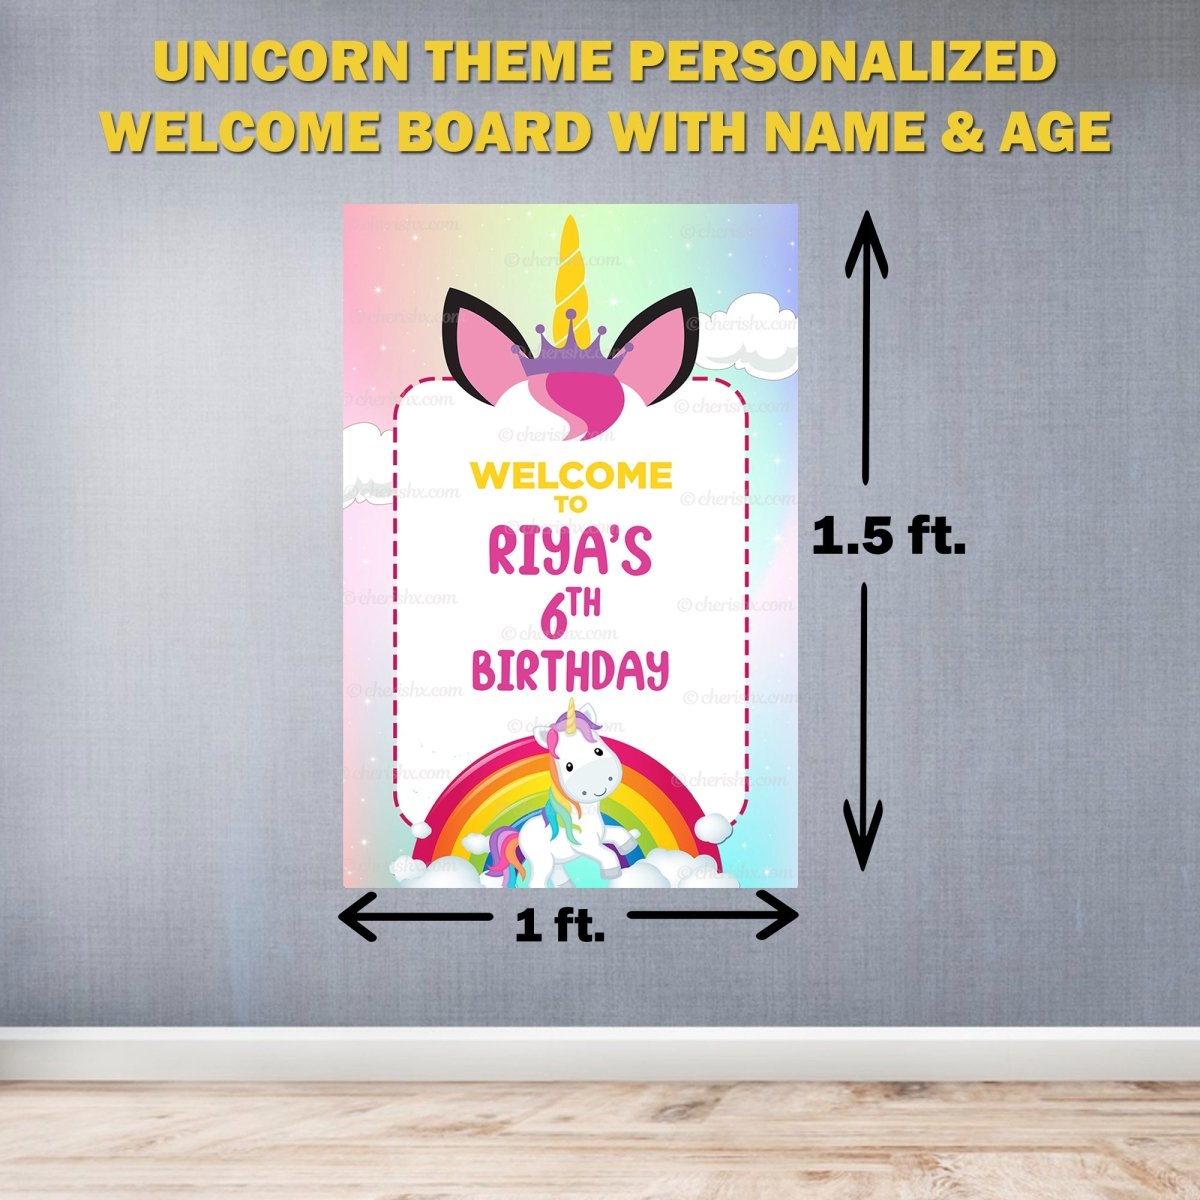 Unicorn Theme Personalized Welcome Board for Kids Birthday - Welcome ...